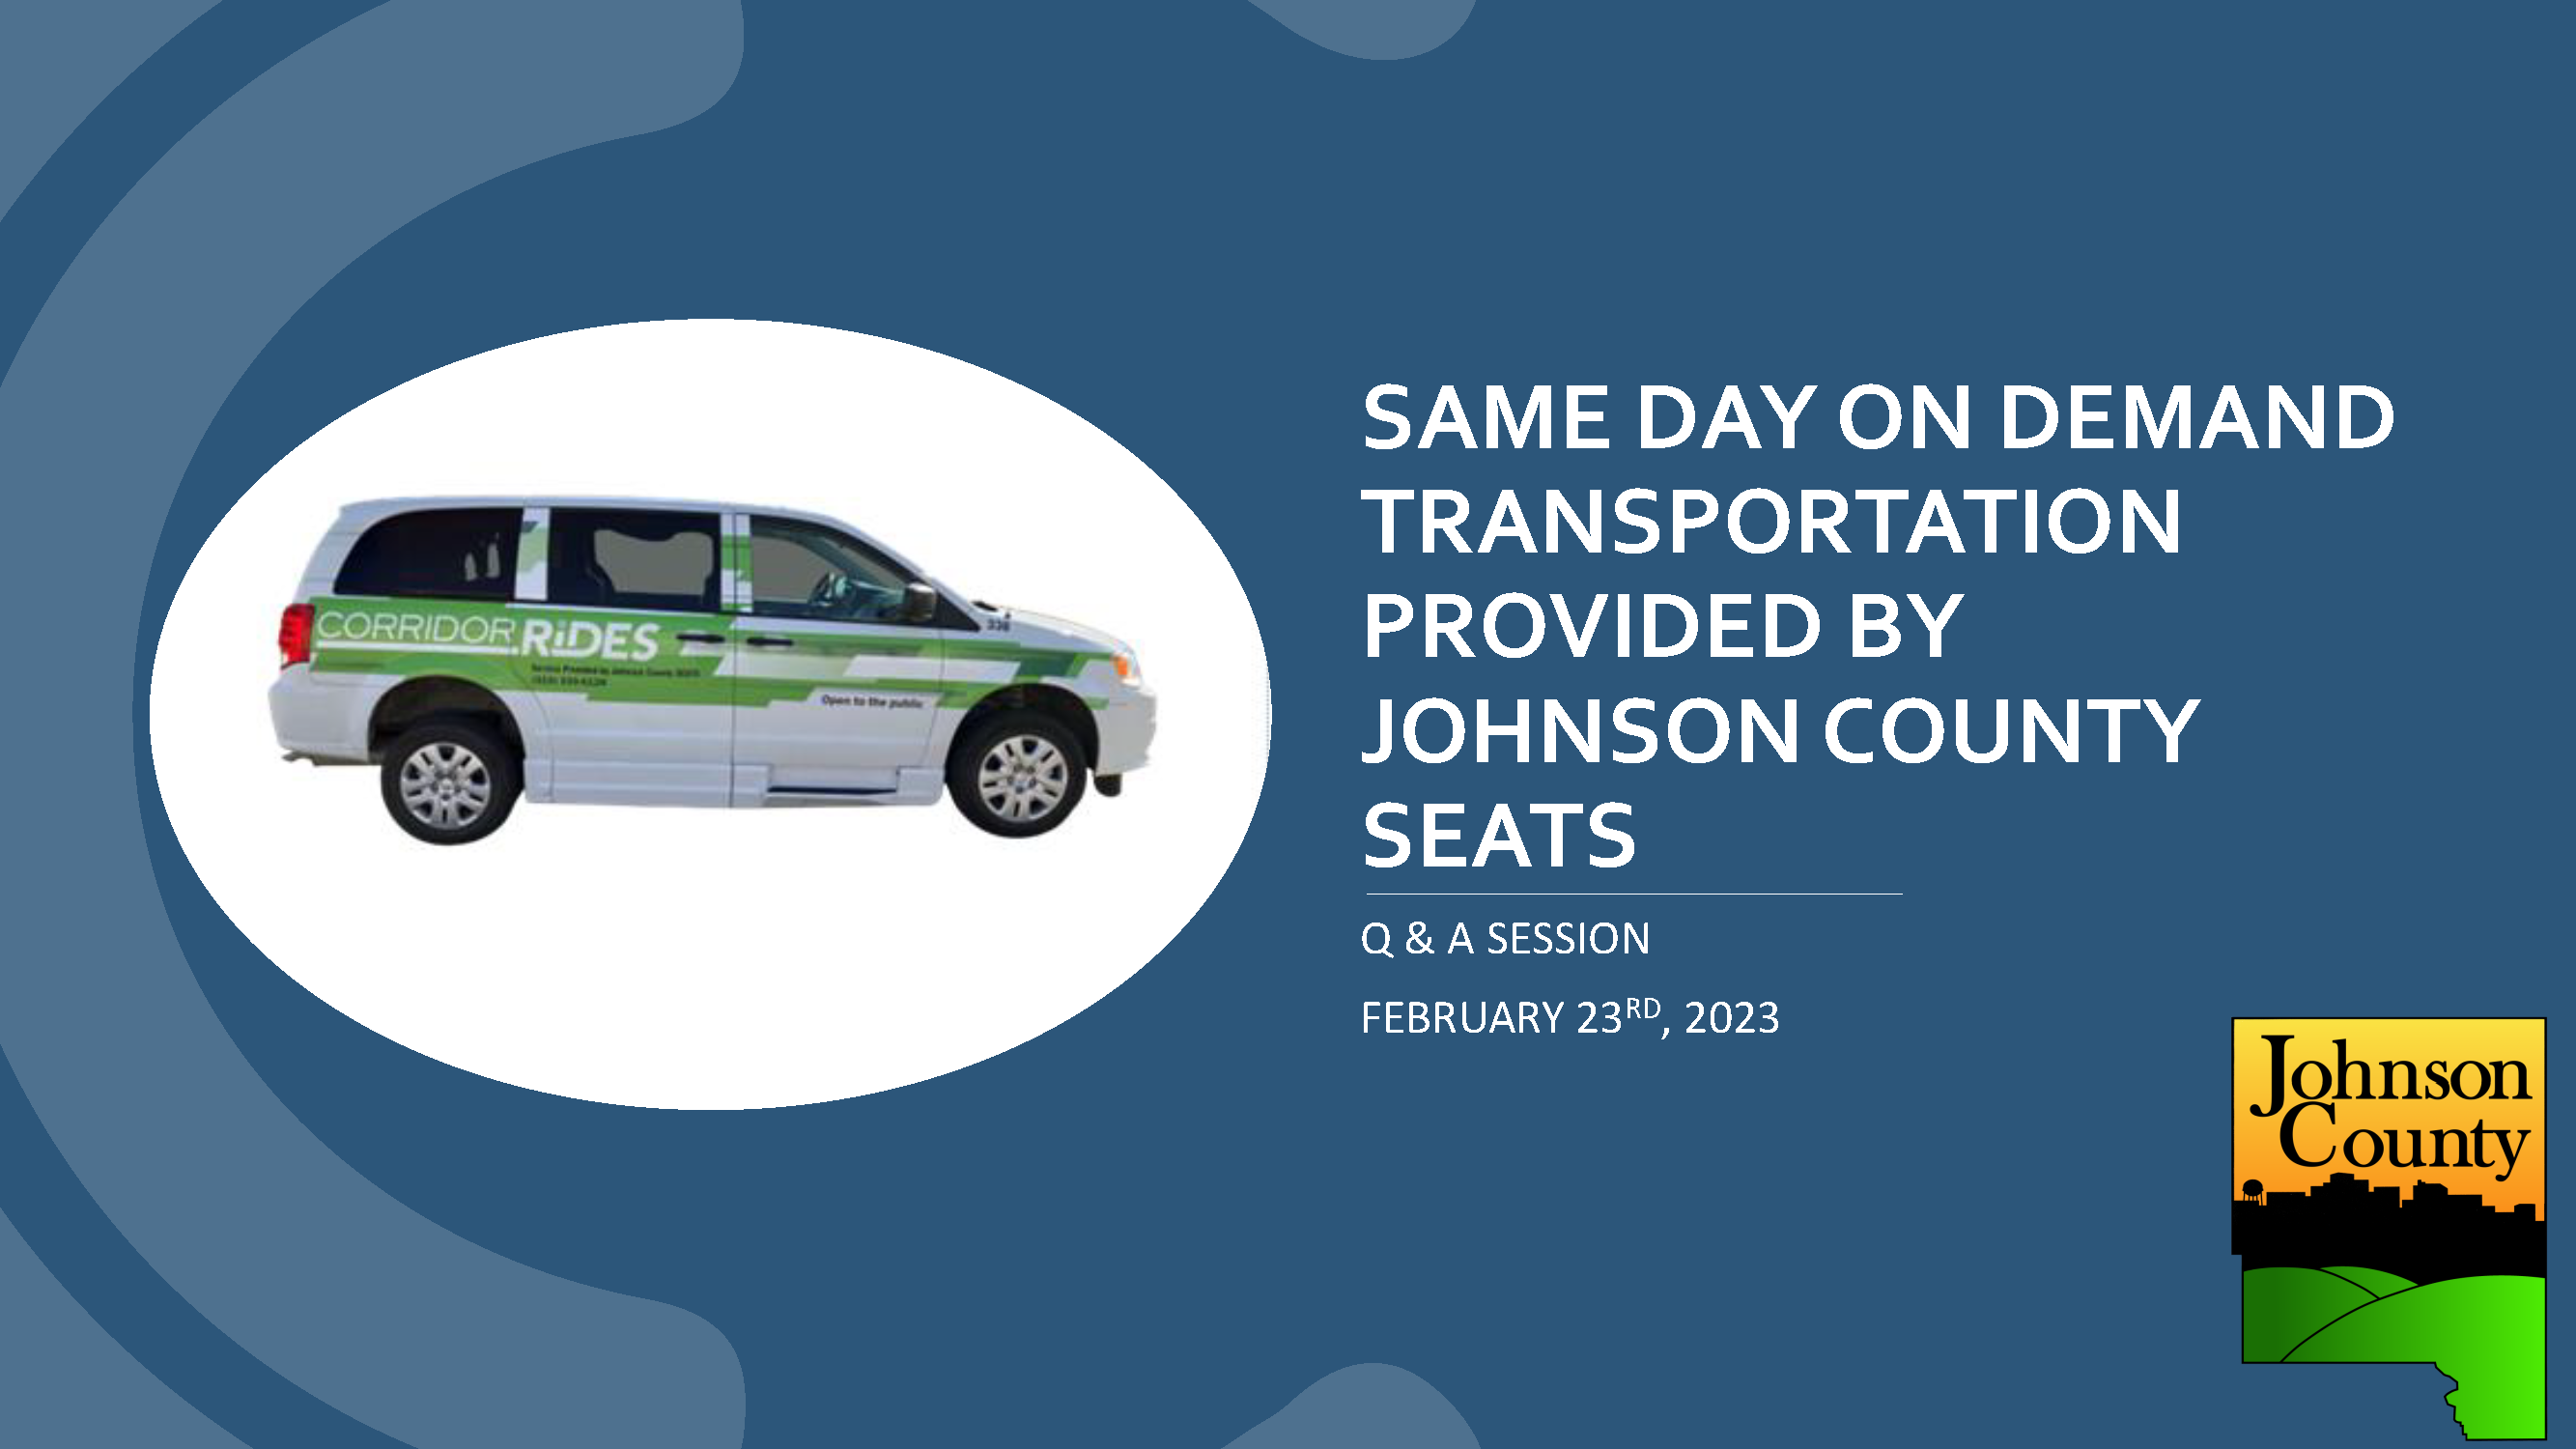 This image contains a photo from the Same Day On Demand Transportation Service Training recording.  The text on the image reads “Same Day on Demand Transportation Provided by Johnson County SEATS. Q & A Session, February 23, 2023”